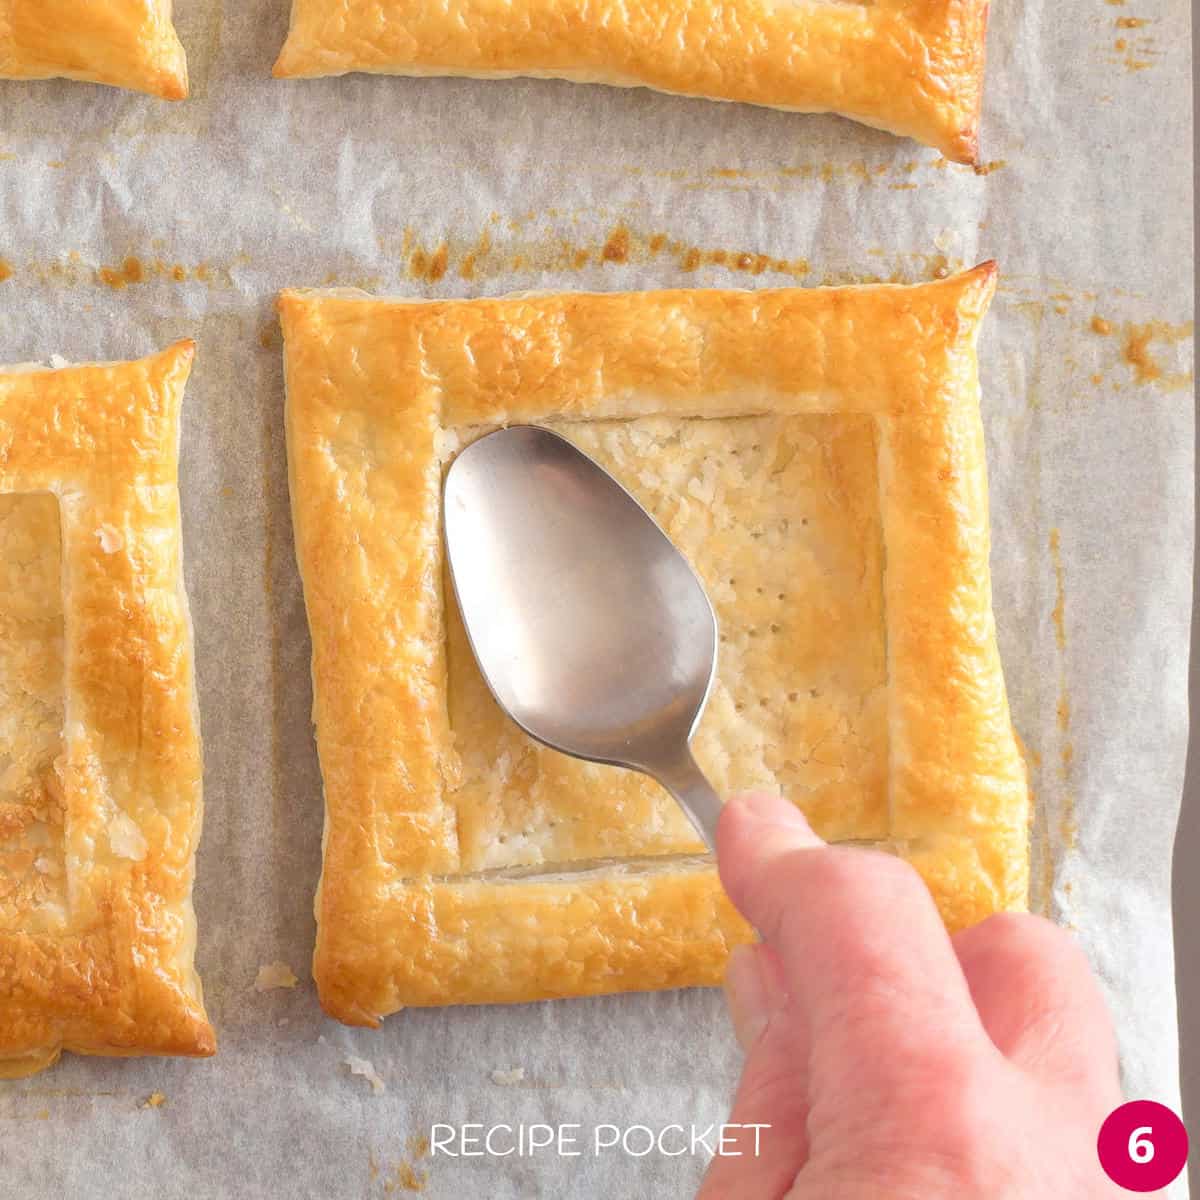 A spoon pressing down the centre of a cooked piece of pastry.